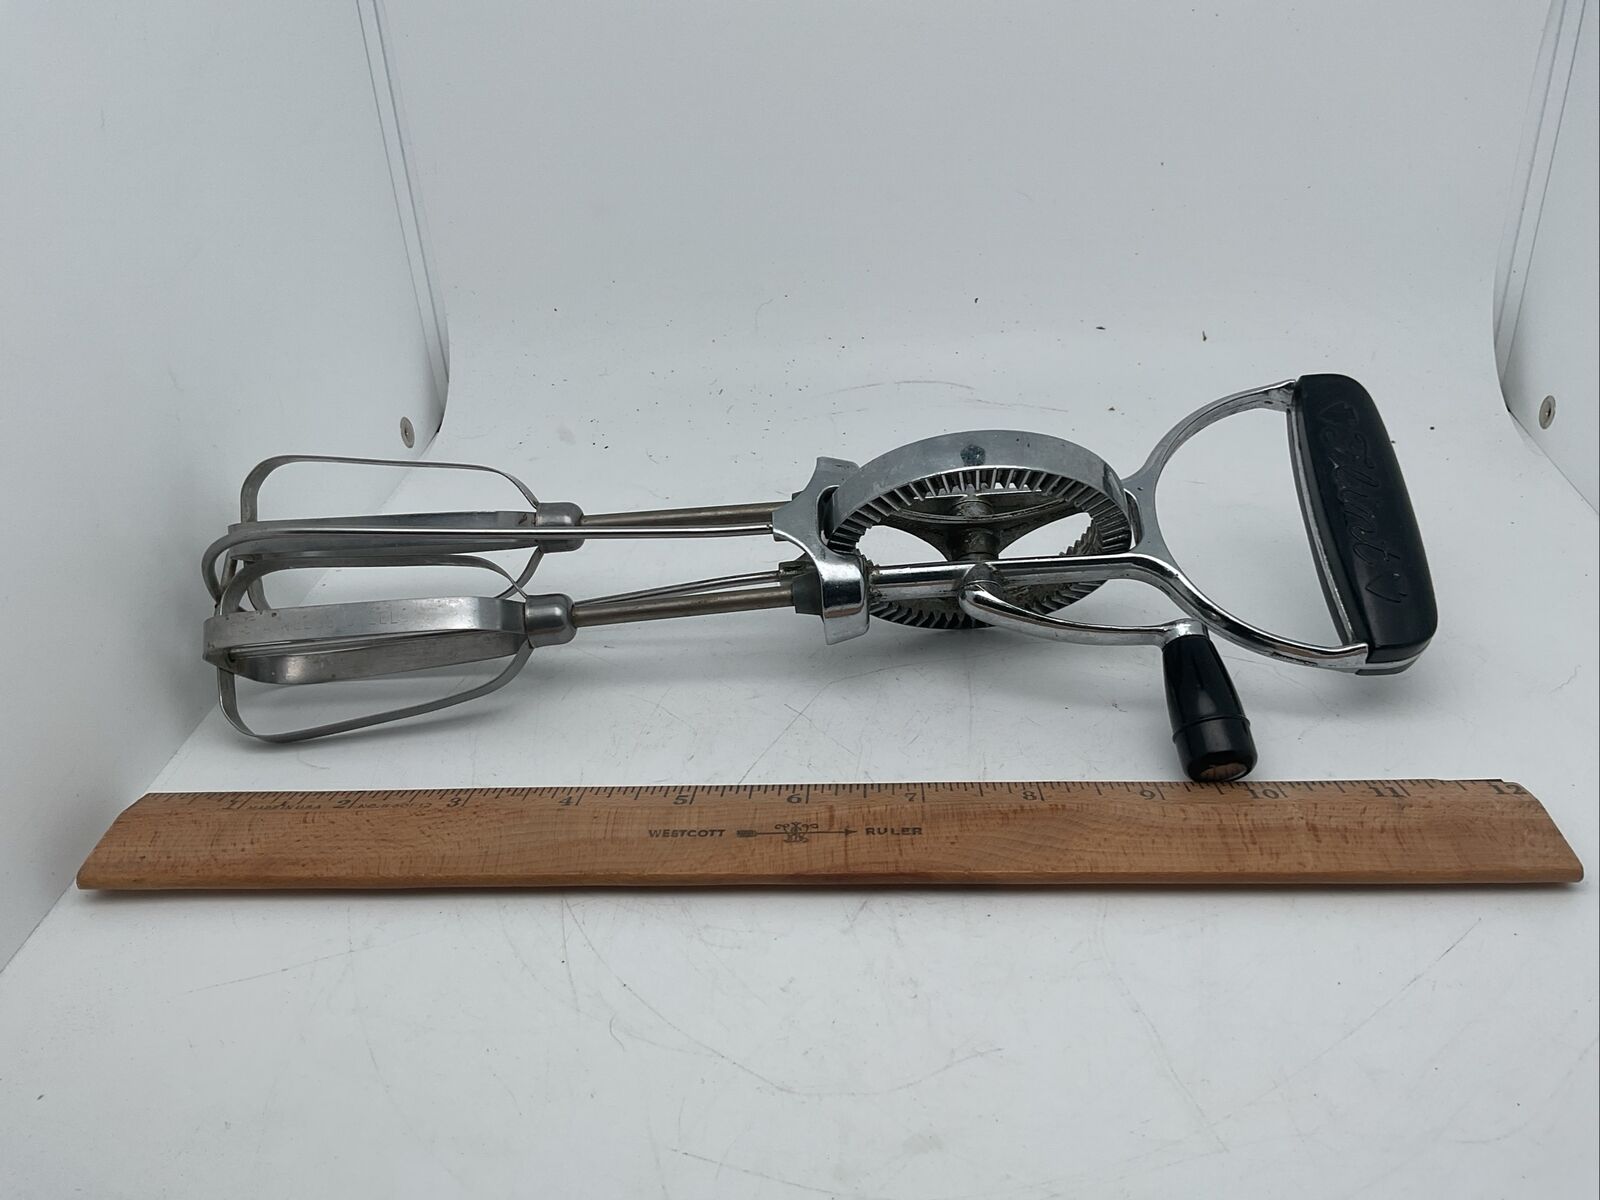 Vintage EKCO Best Egg Beater Mixer Handheld Mixer Stainless Steel Made in USA